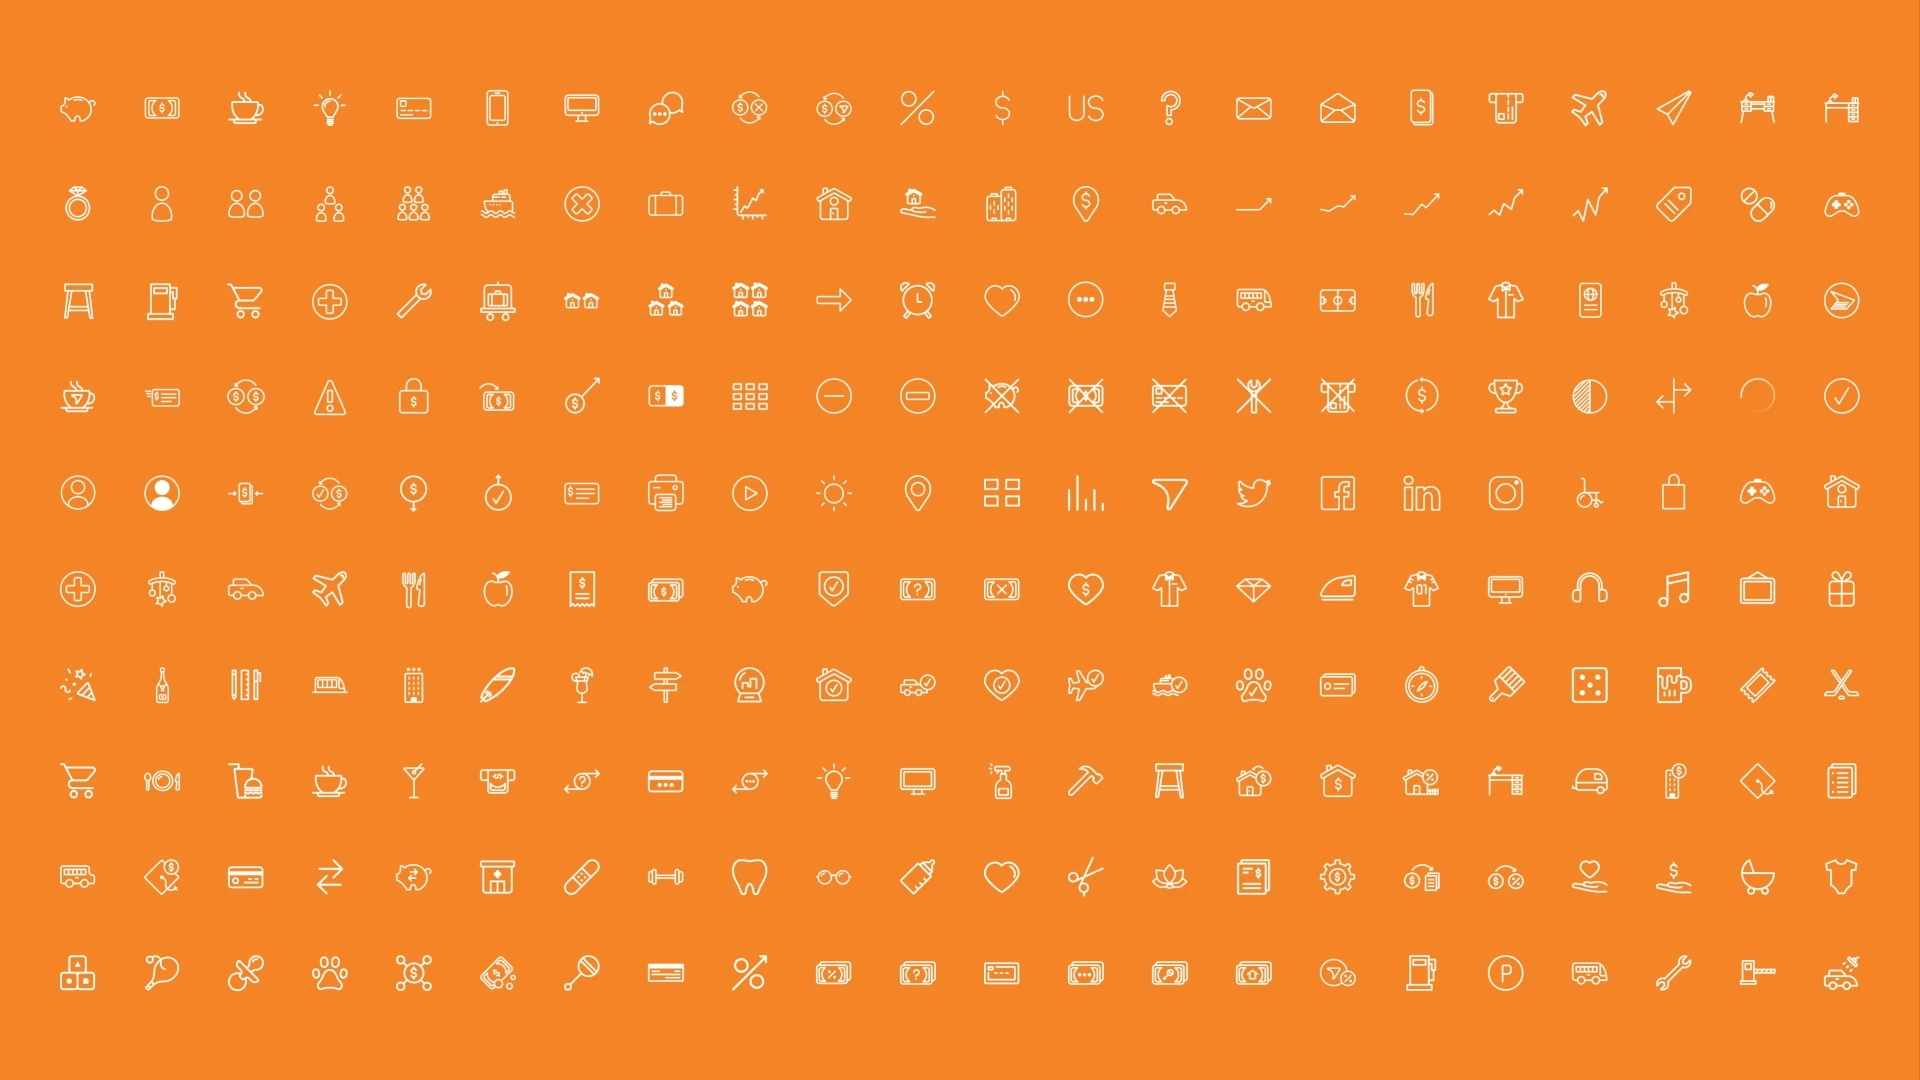 orange and white image showing hundreds of icons created for tangerine in a grid layout